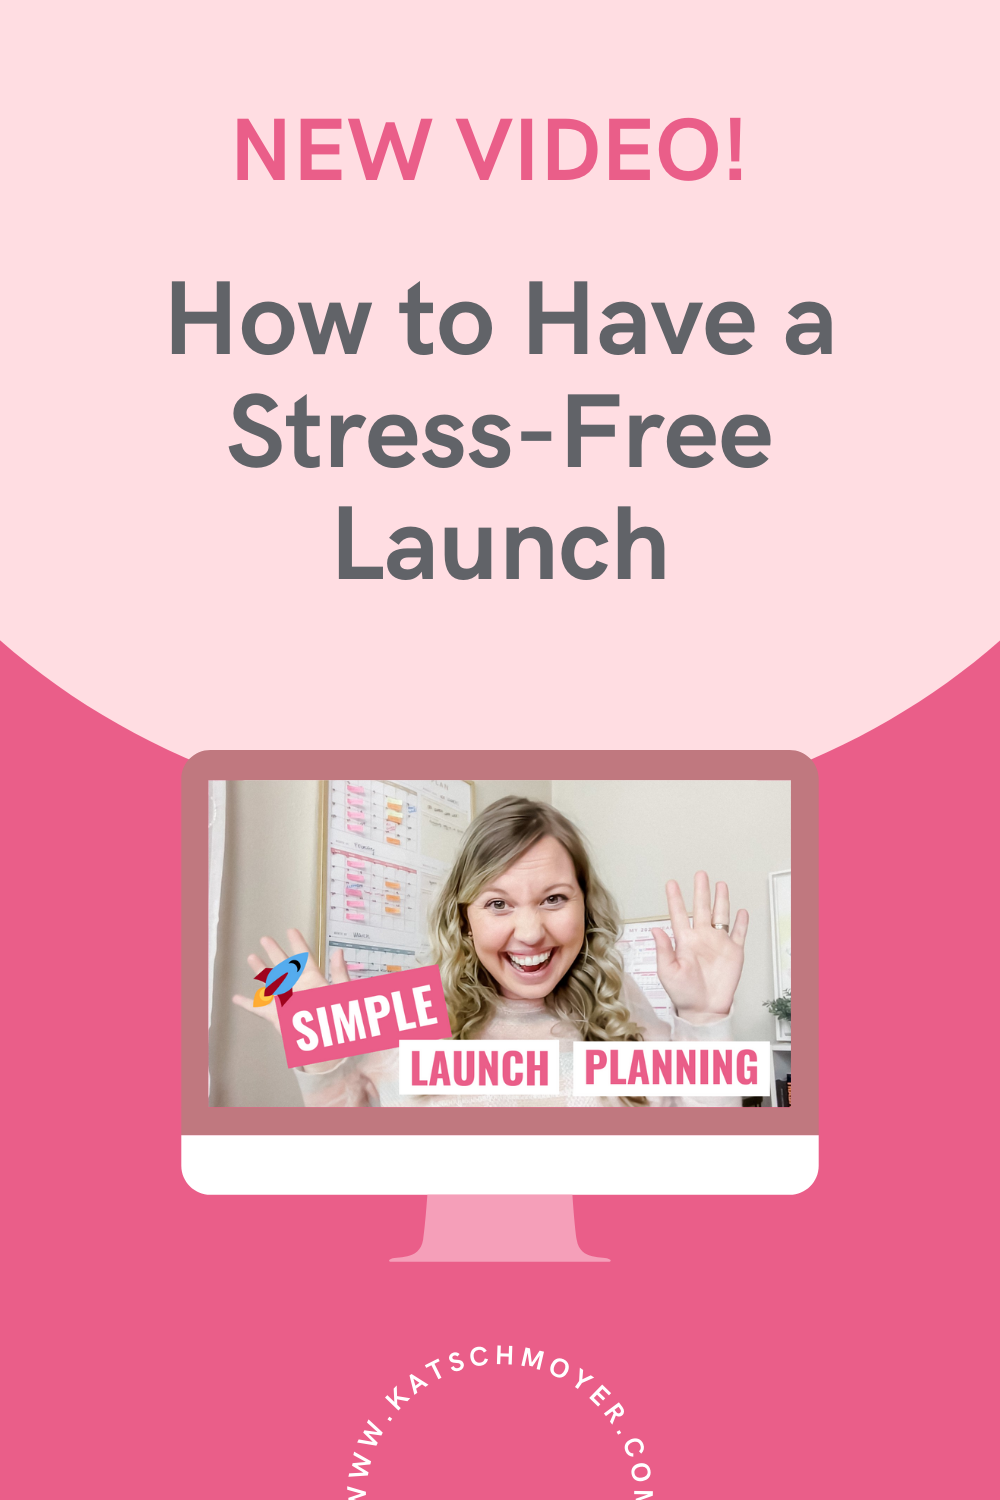 How to Have a Stress-Free Launch